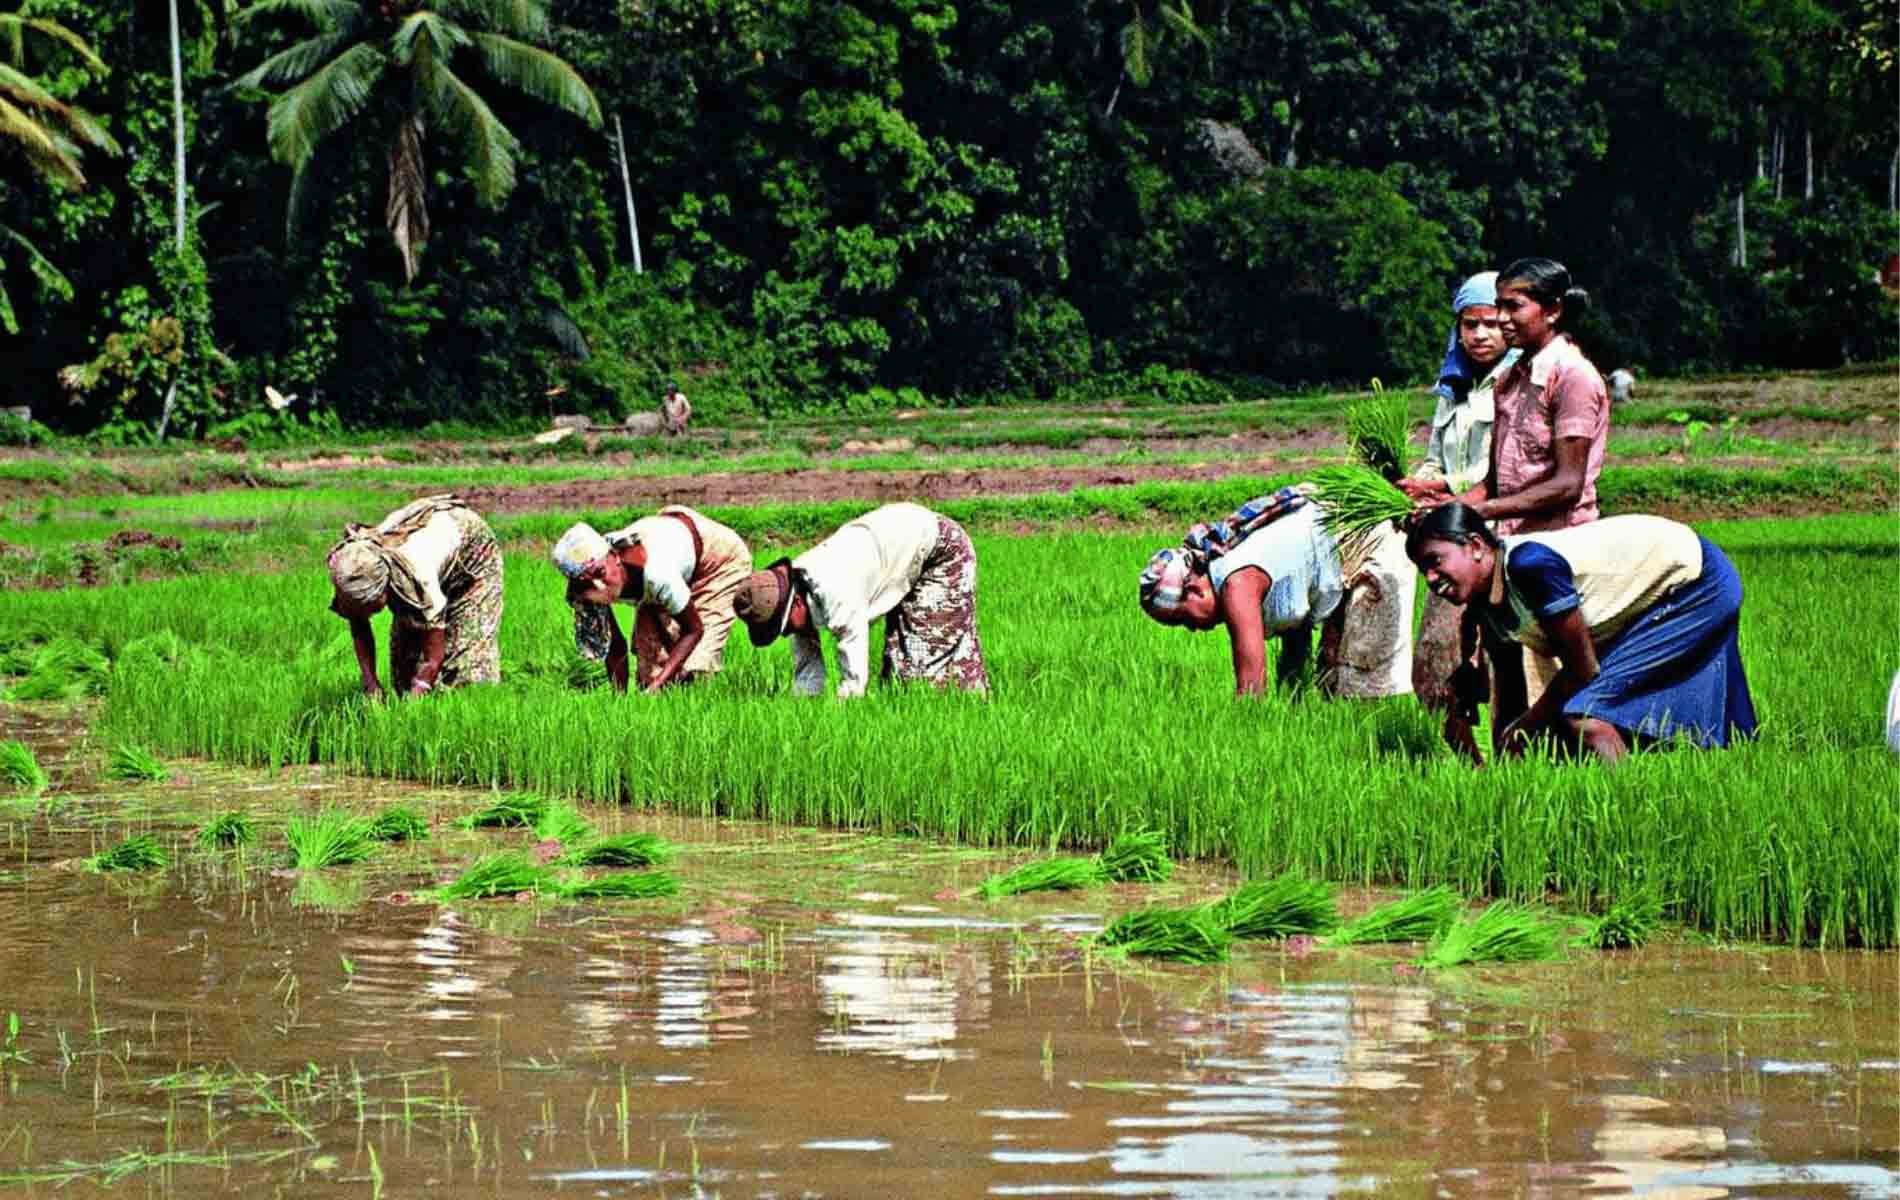 Agriculture industry in Sri Lanka